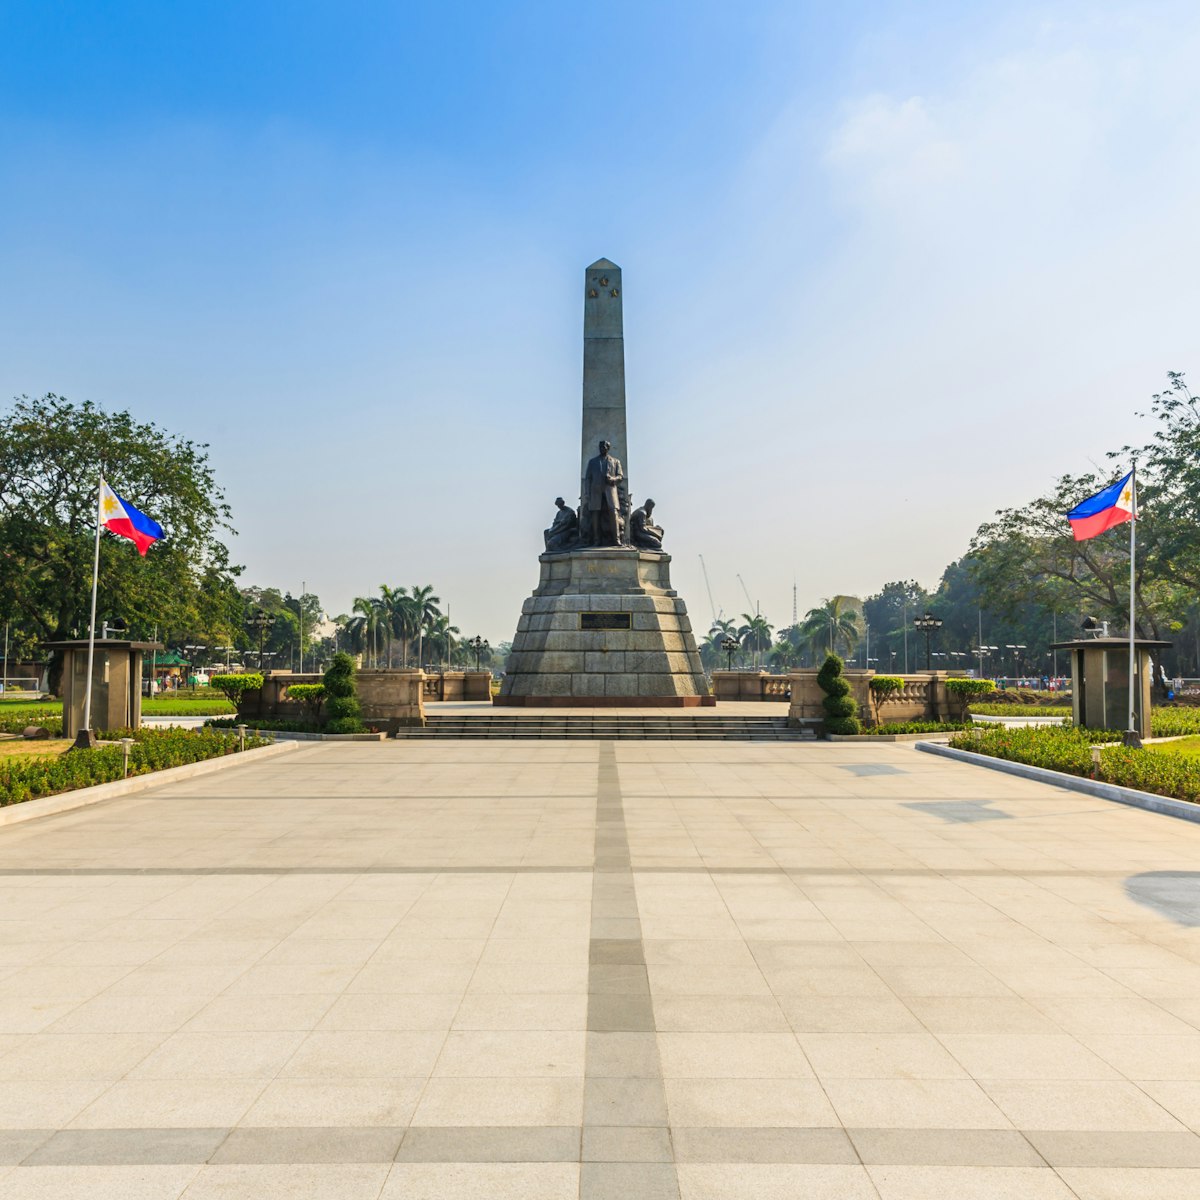 MANILA - FEB 14: Jose Rizal Monument on 14 Feb, 14 in Manila. The monument dedicated for Jose Rezal, he is widely considered the greatest national hero of the Philippines.; Shutterstock ID 181608902; Your name (First / Last): Josh Vogel; GL account no.: 56530; Netsuite department name: Online Design; Full Product or Project name including edition: Digital Content/Sights